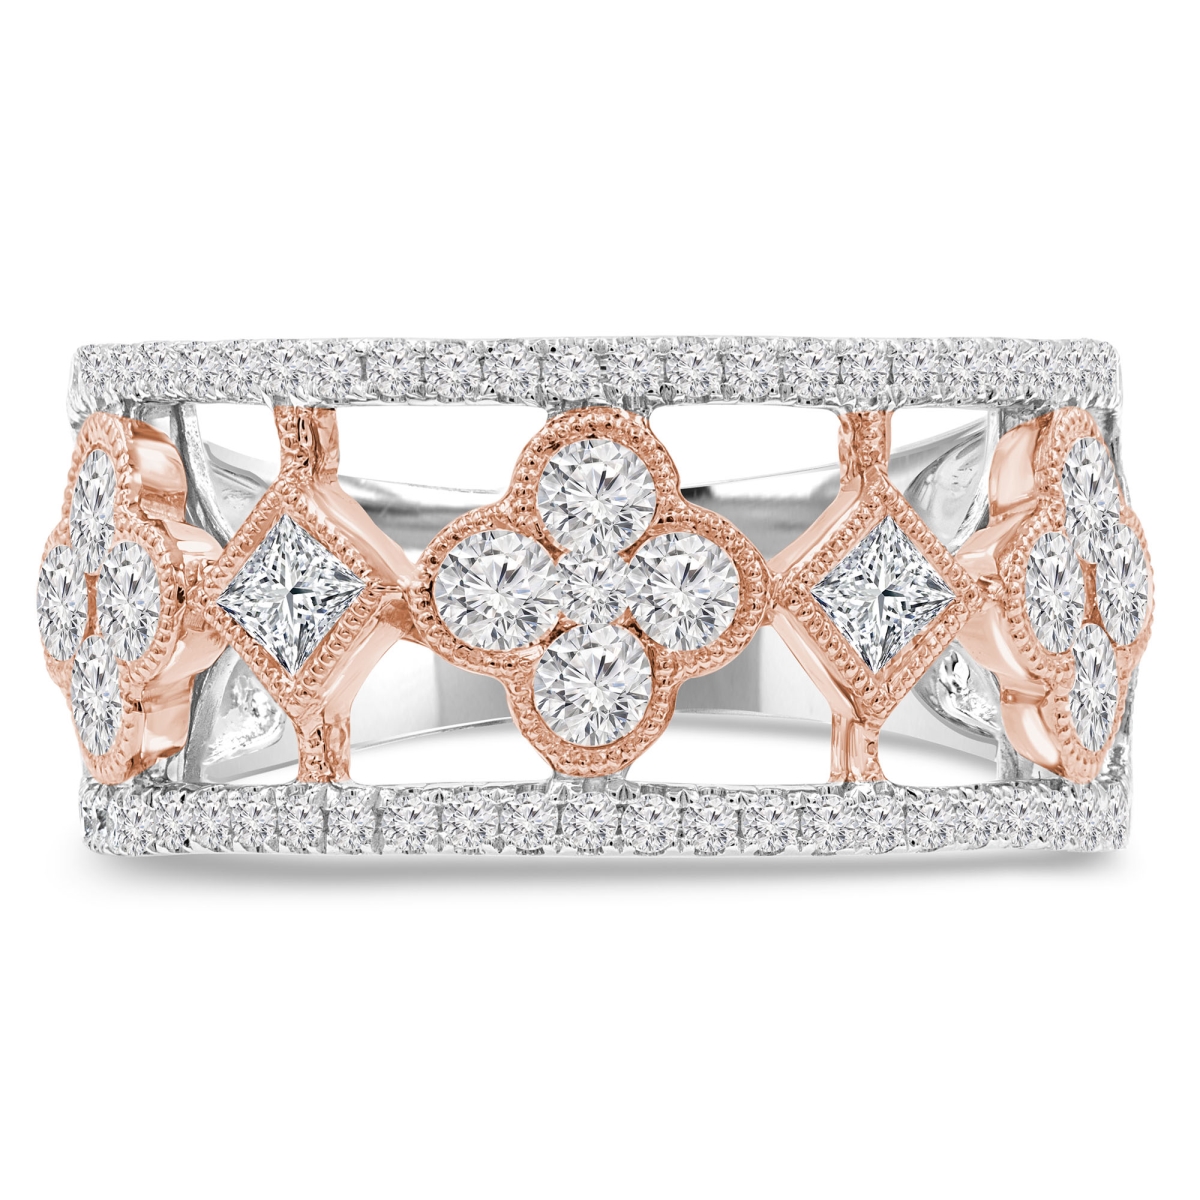 Picture of Majesty Diamonds MDR210138-7 1.13 CTW Princess Diamond Cocktail Ring in 14K Two-Tone Gold - Size 7